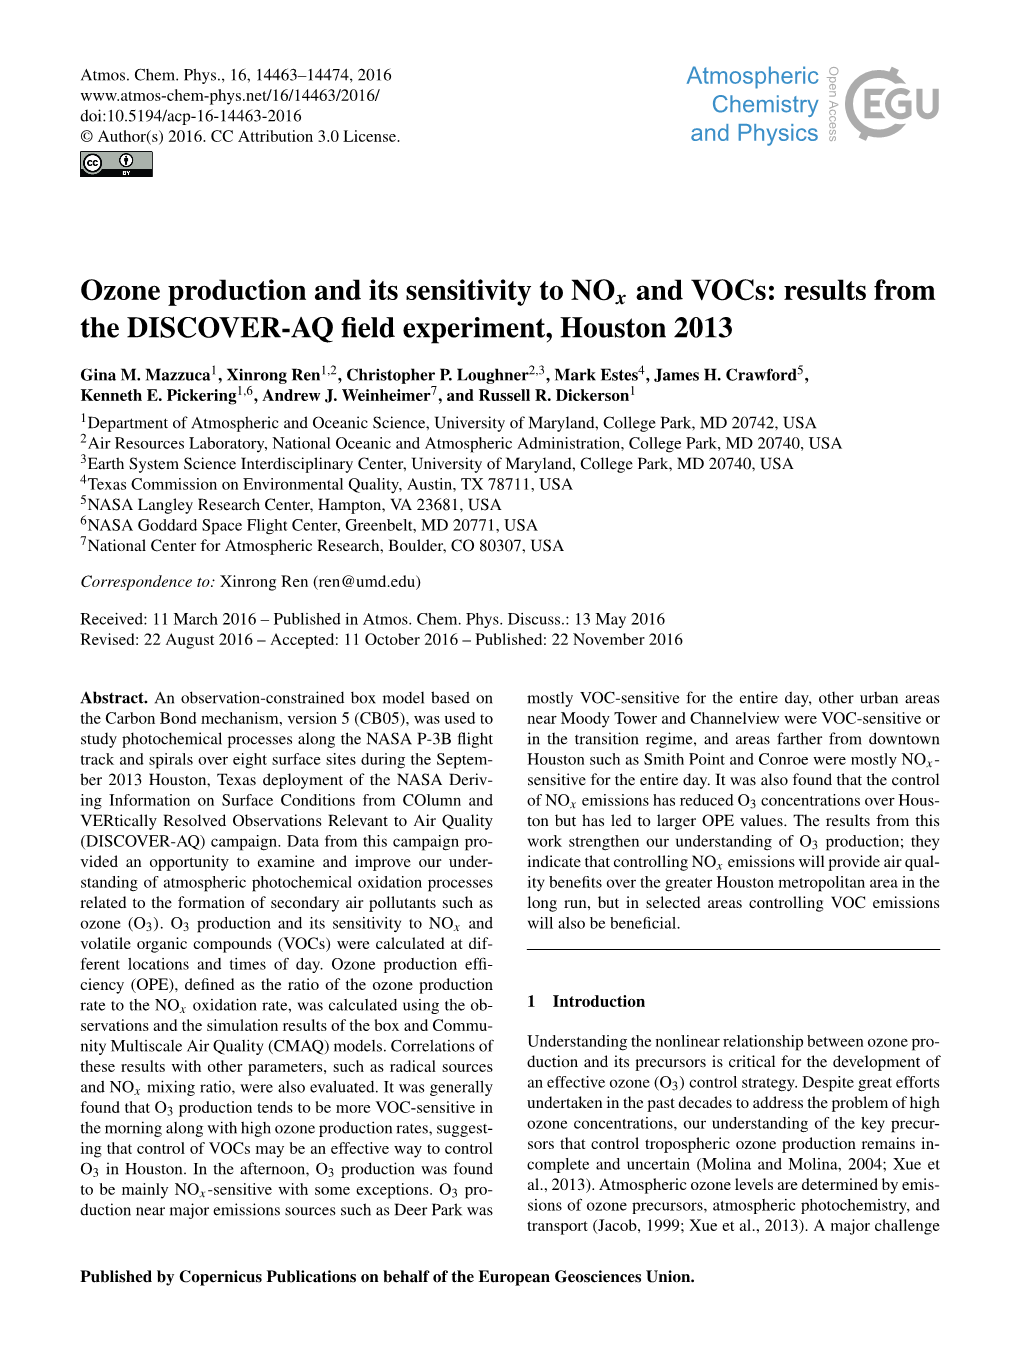 Ozone Production and Its Sensitivity to Nox and Vocs: Results from the DISCOVER-AQ ﬁeld Experiment, Houston 2013